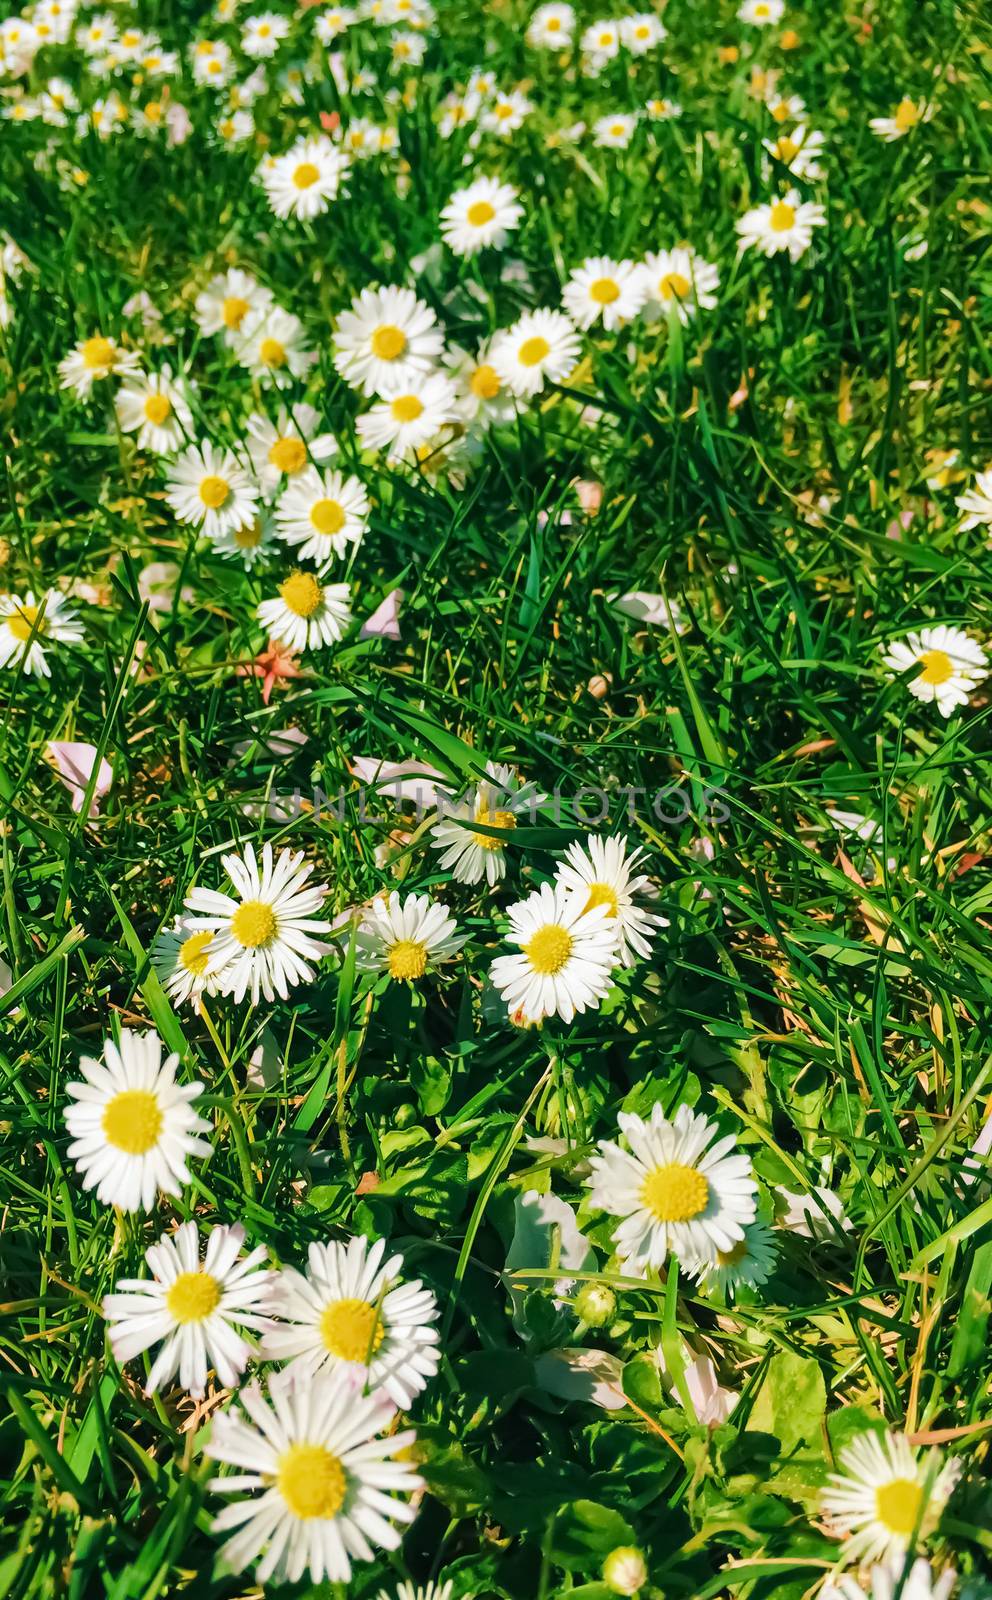 Daisy flowers and green grass in spring, nature and outdoors concept